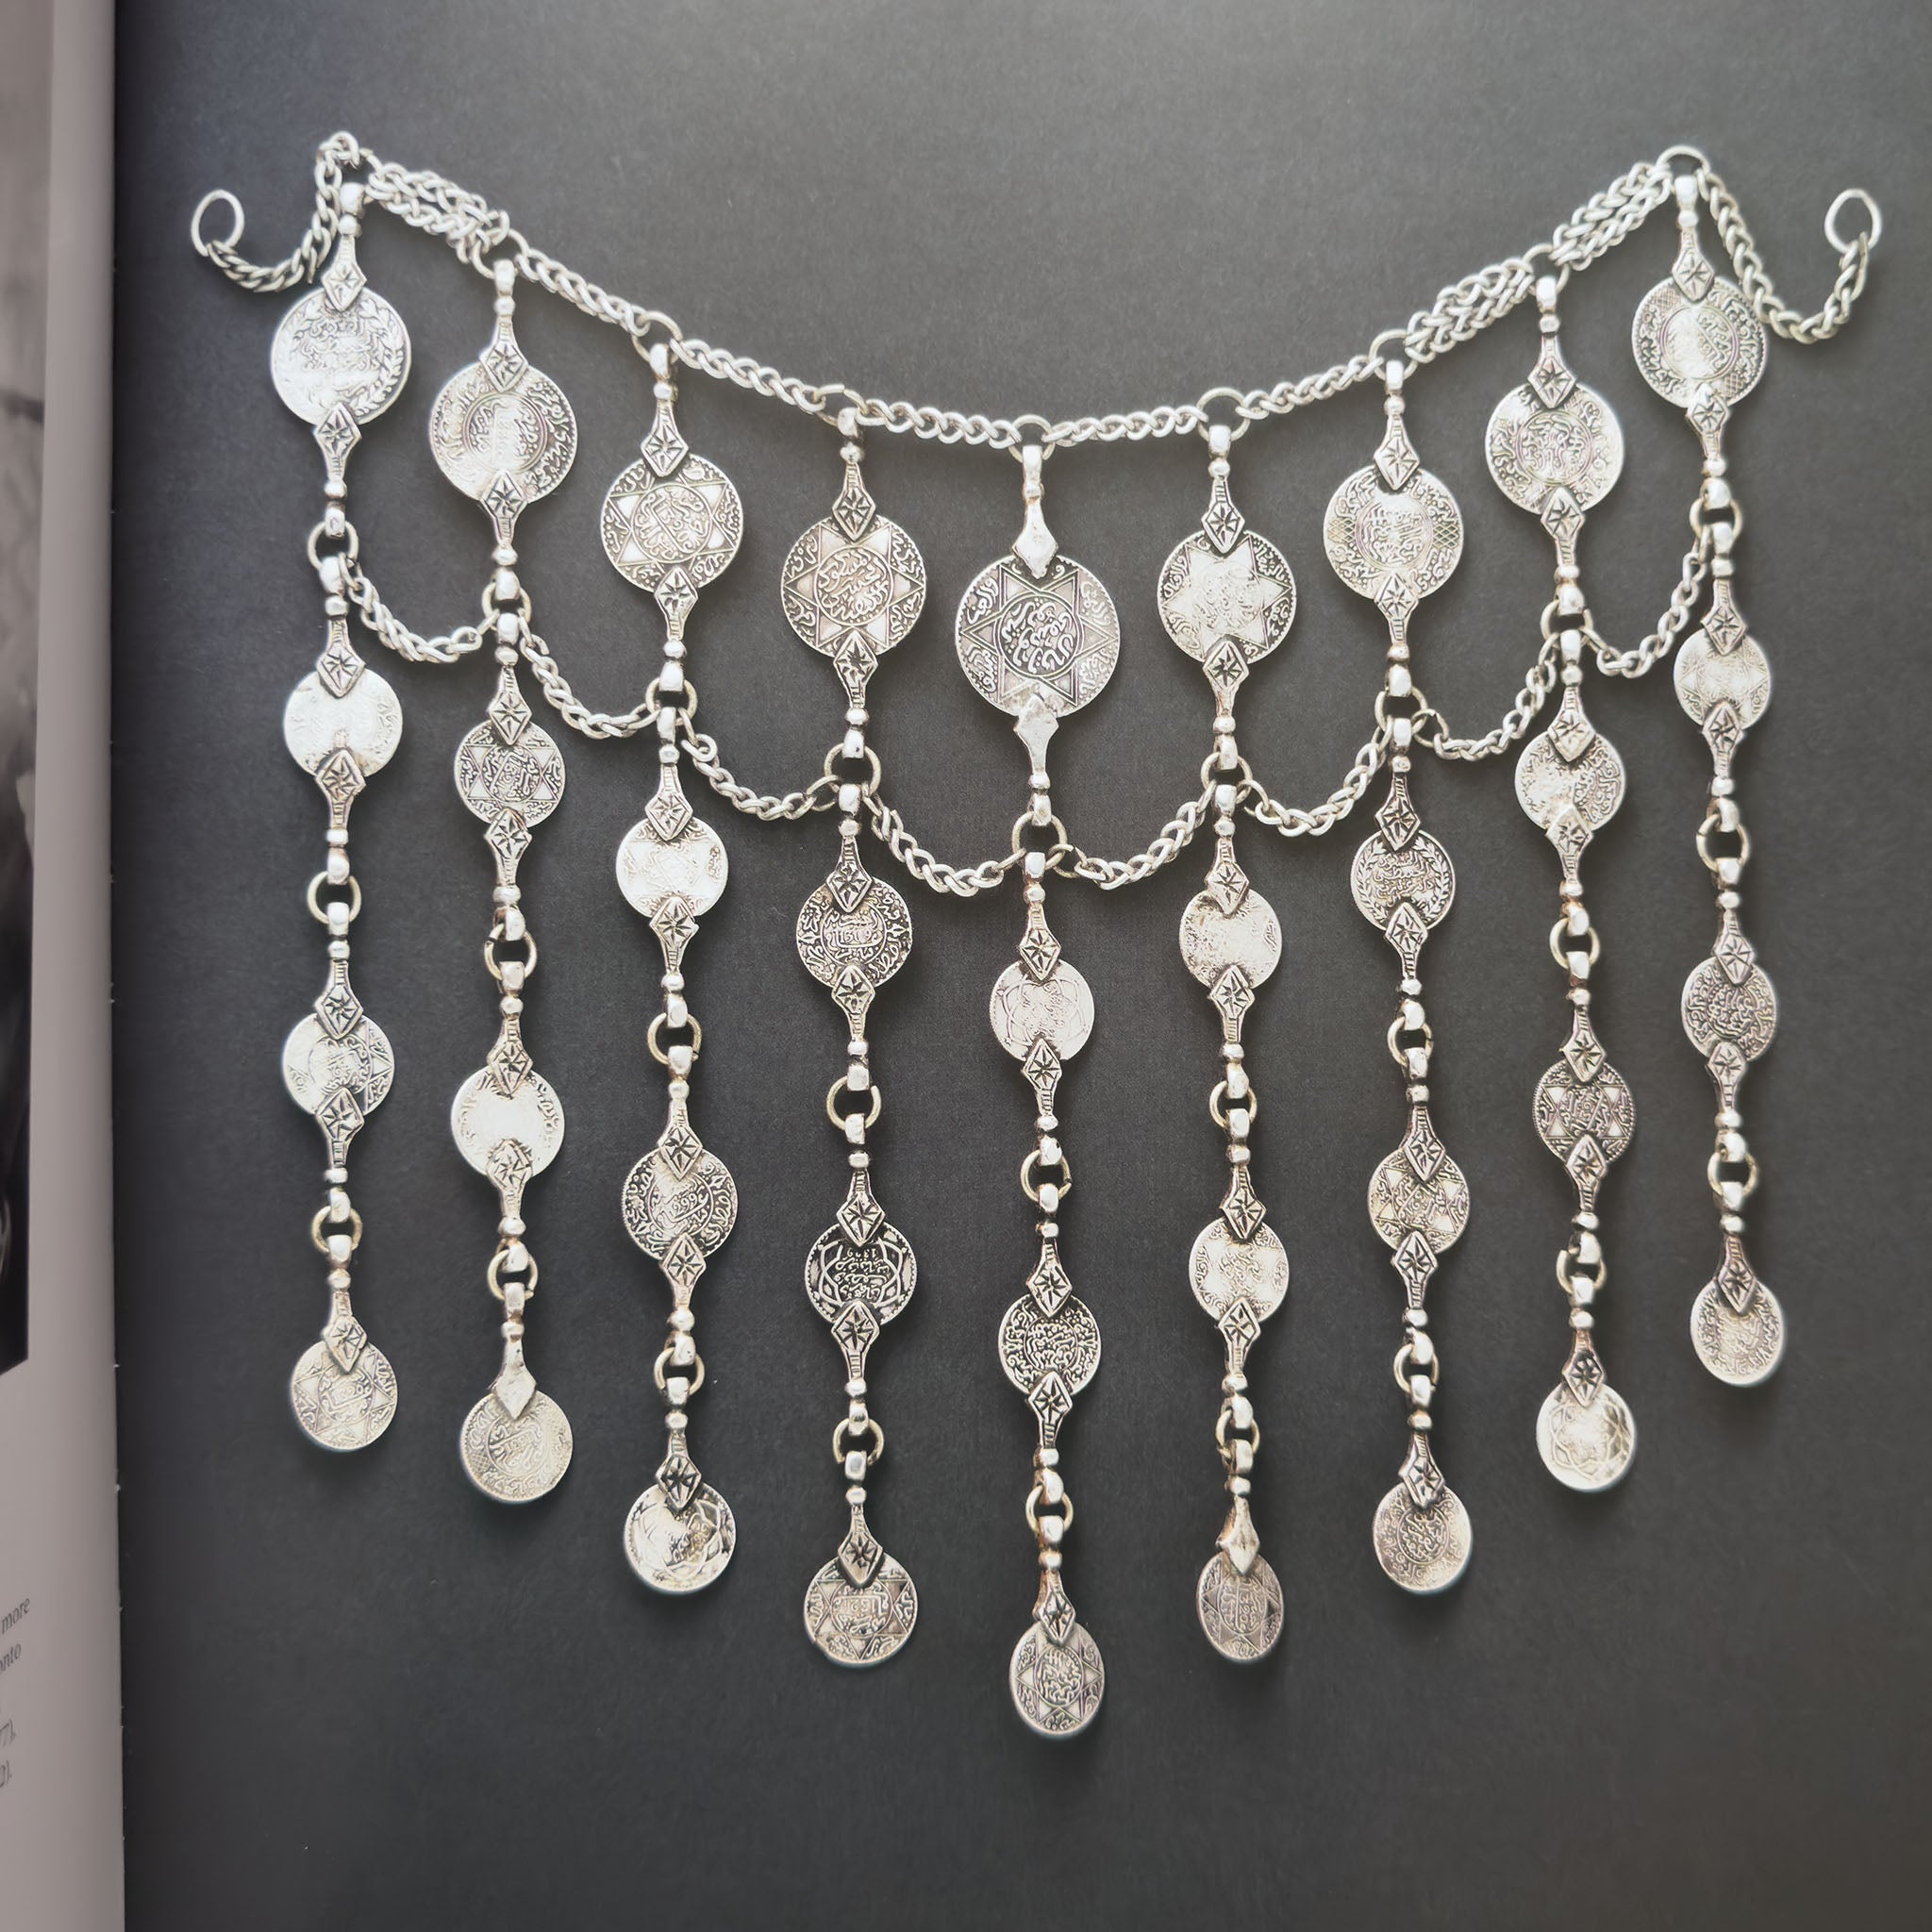 Old Moroccan Silver Coin Necklace